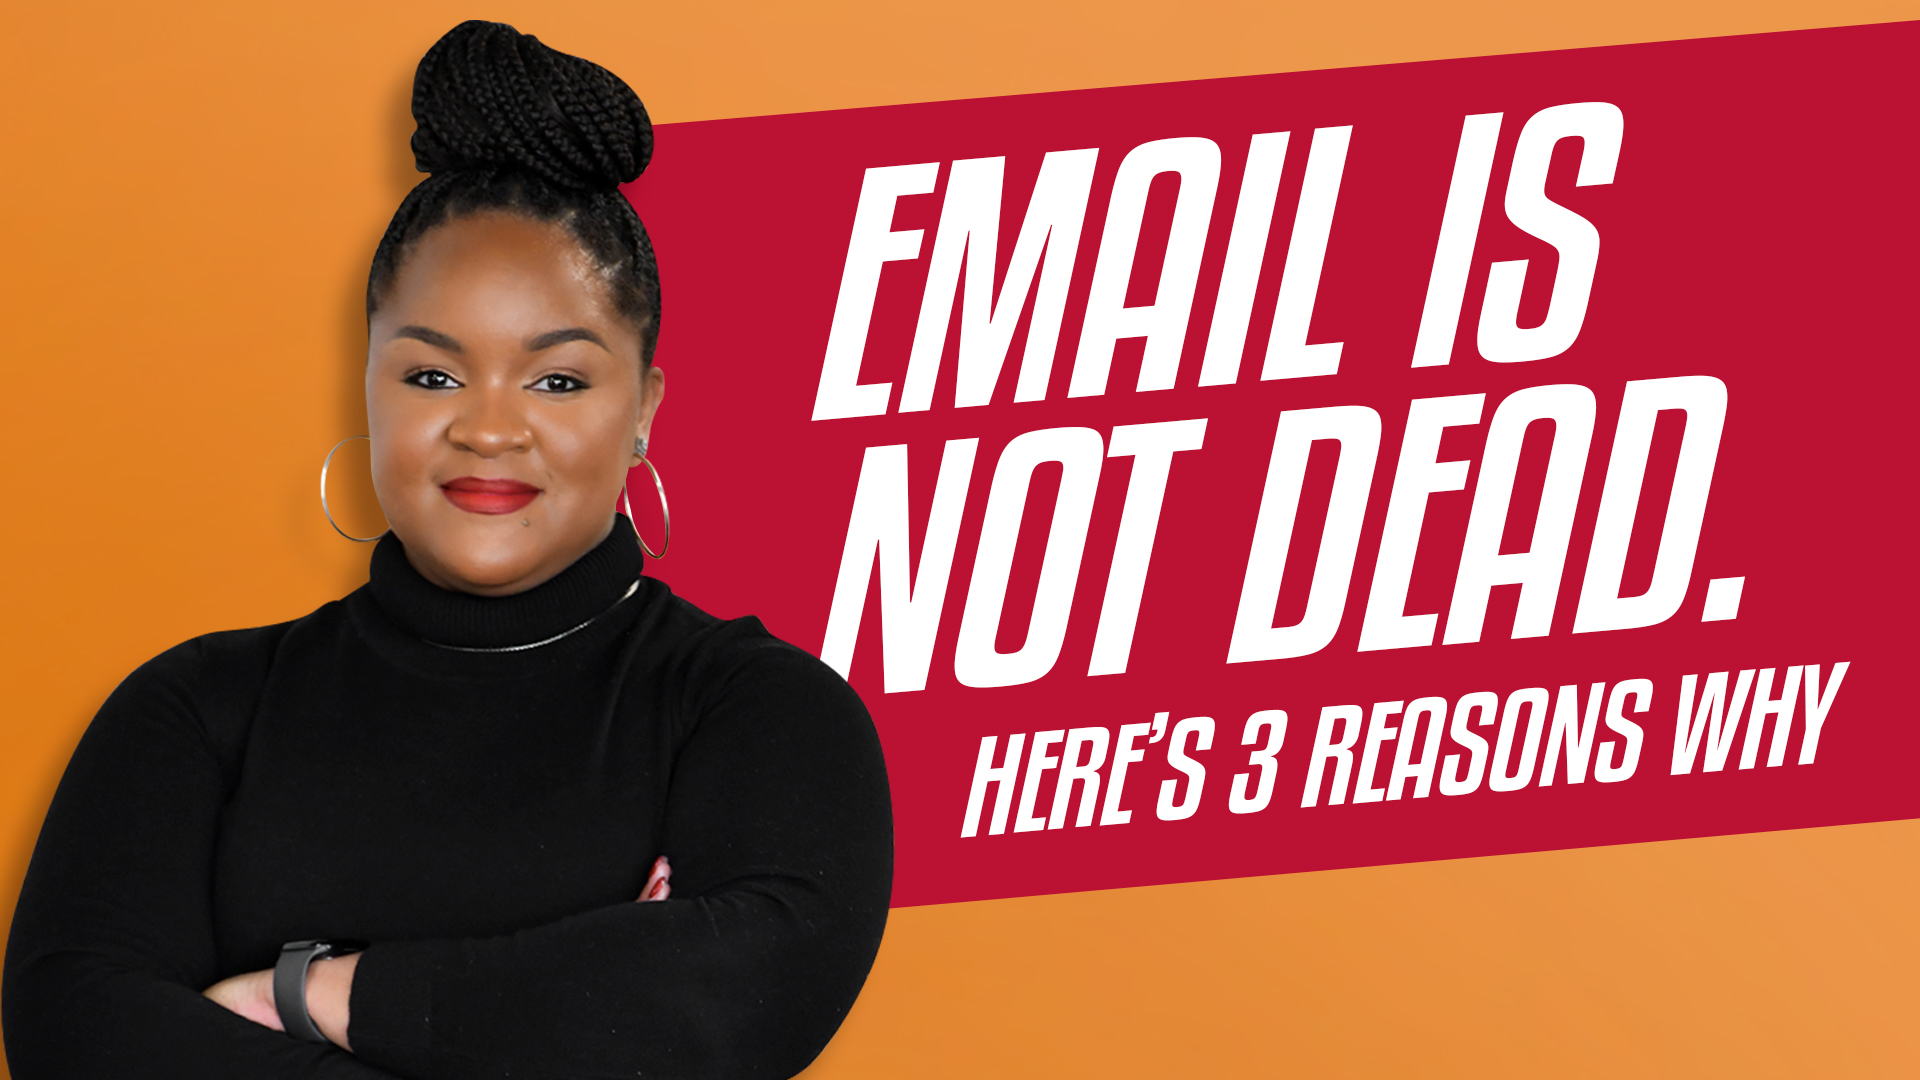 Episode #2: Email is Not Dead. Here’s 3 Reasons Why